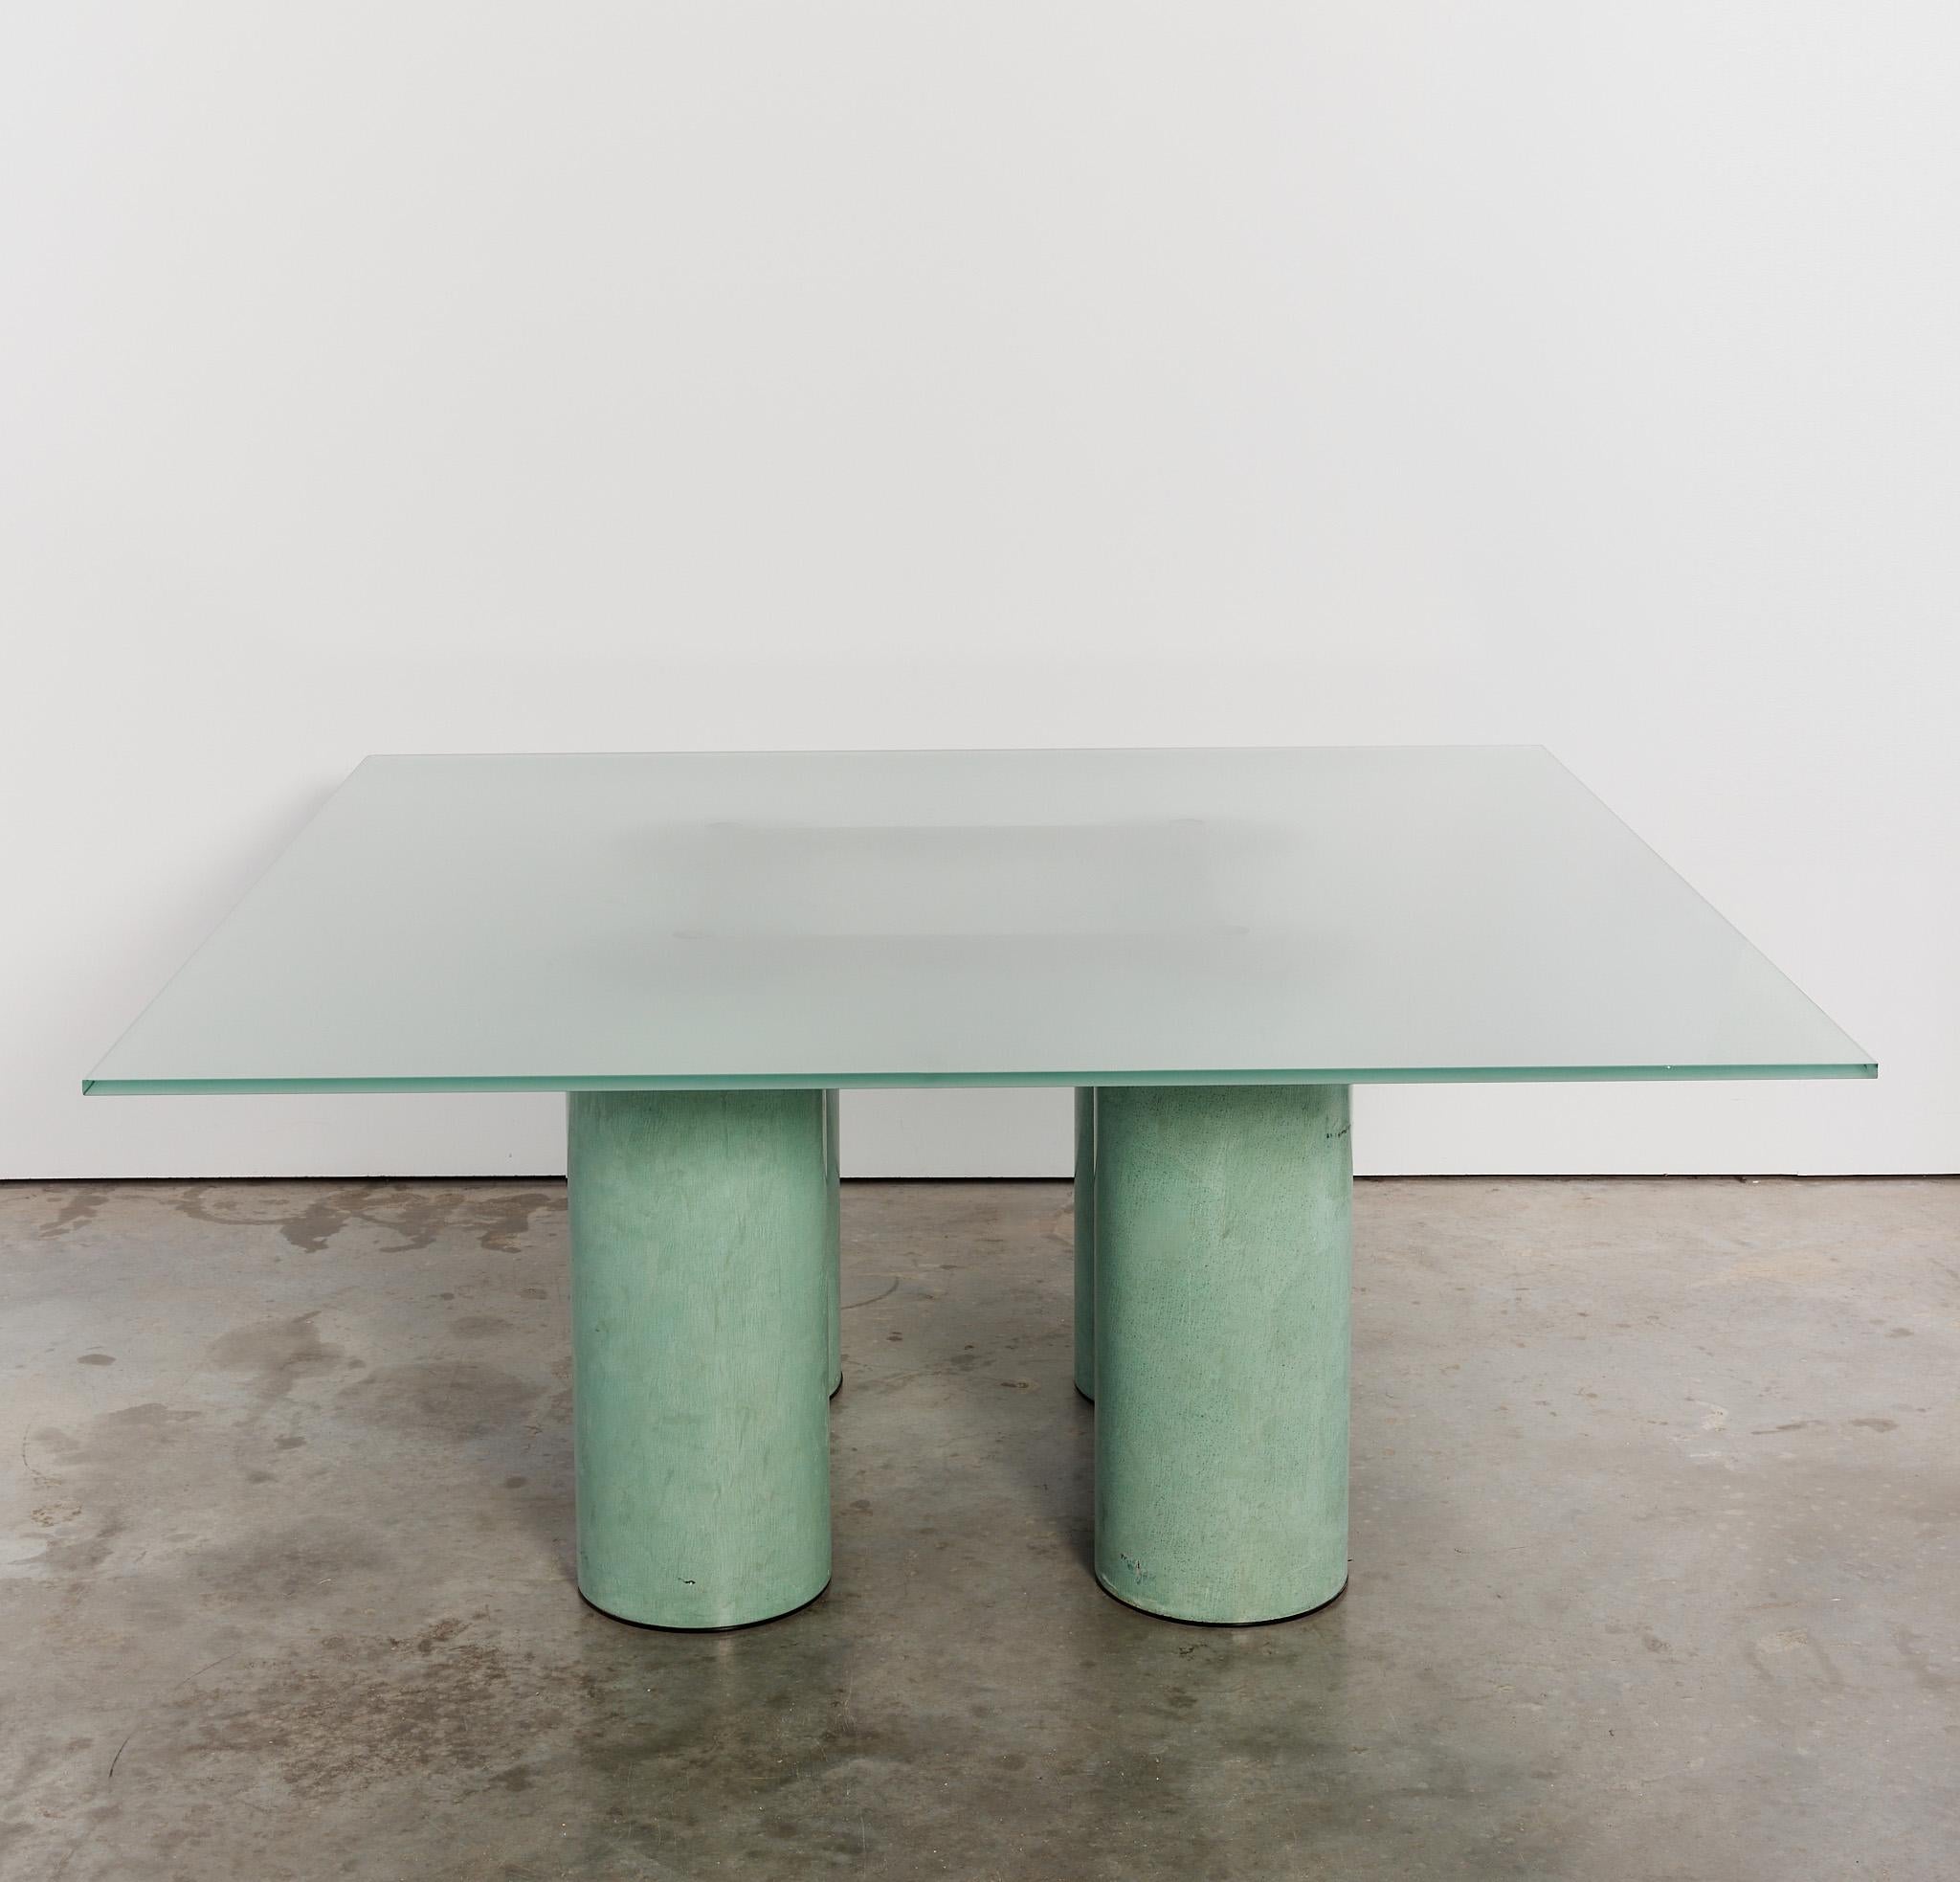 Serenissimo board room / XL dining table by Massimo & Lella Vignelli for Acerbis In Good Condition For Sale In London, GB